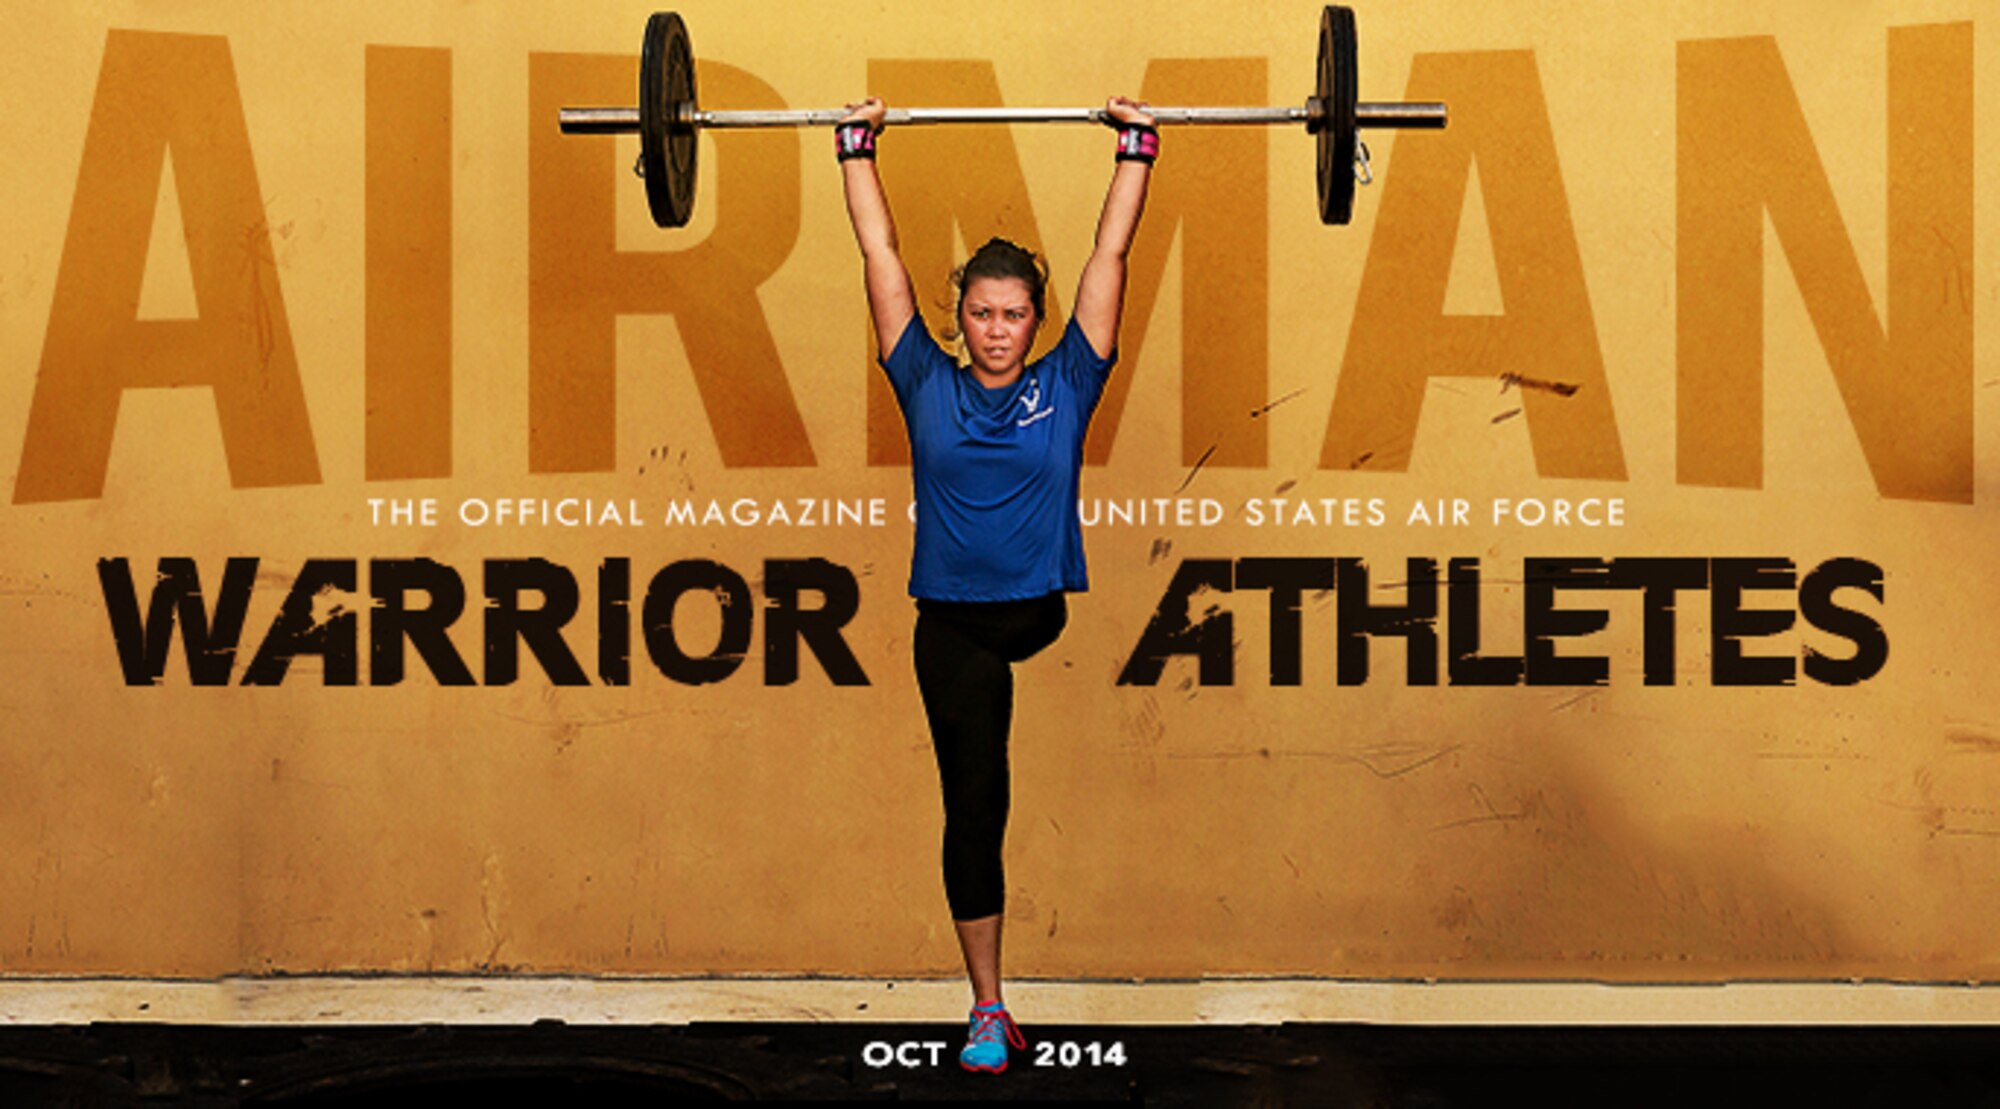 The cover story for the October 2014 edition of Airman magazine is titled “Going Beyond,” and tells the story of several Air Force wounded warriors learning how to go beyond what others would call limits as they prepared for the Warrior Games.  (U.S. Air Force graphic/Maureen Stewart)